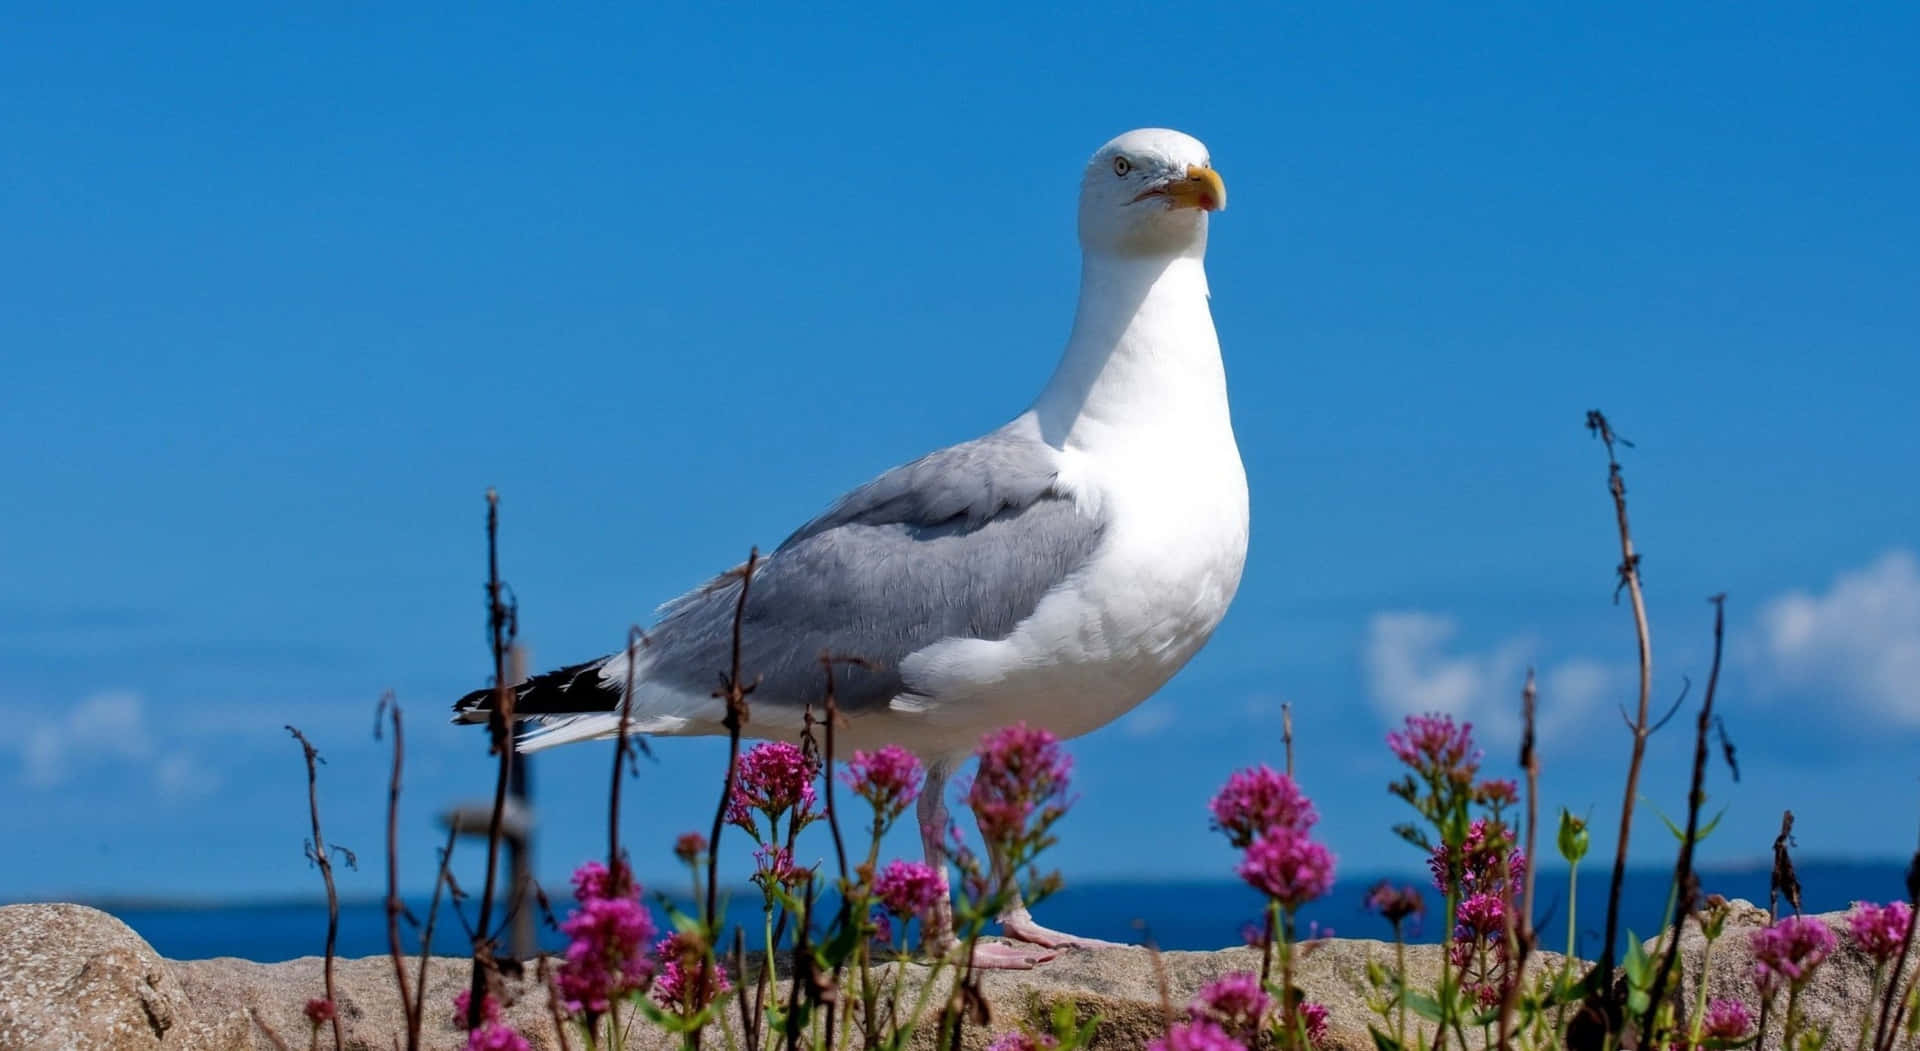 Majestic seagull soaring over the ocean Wallpaper